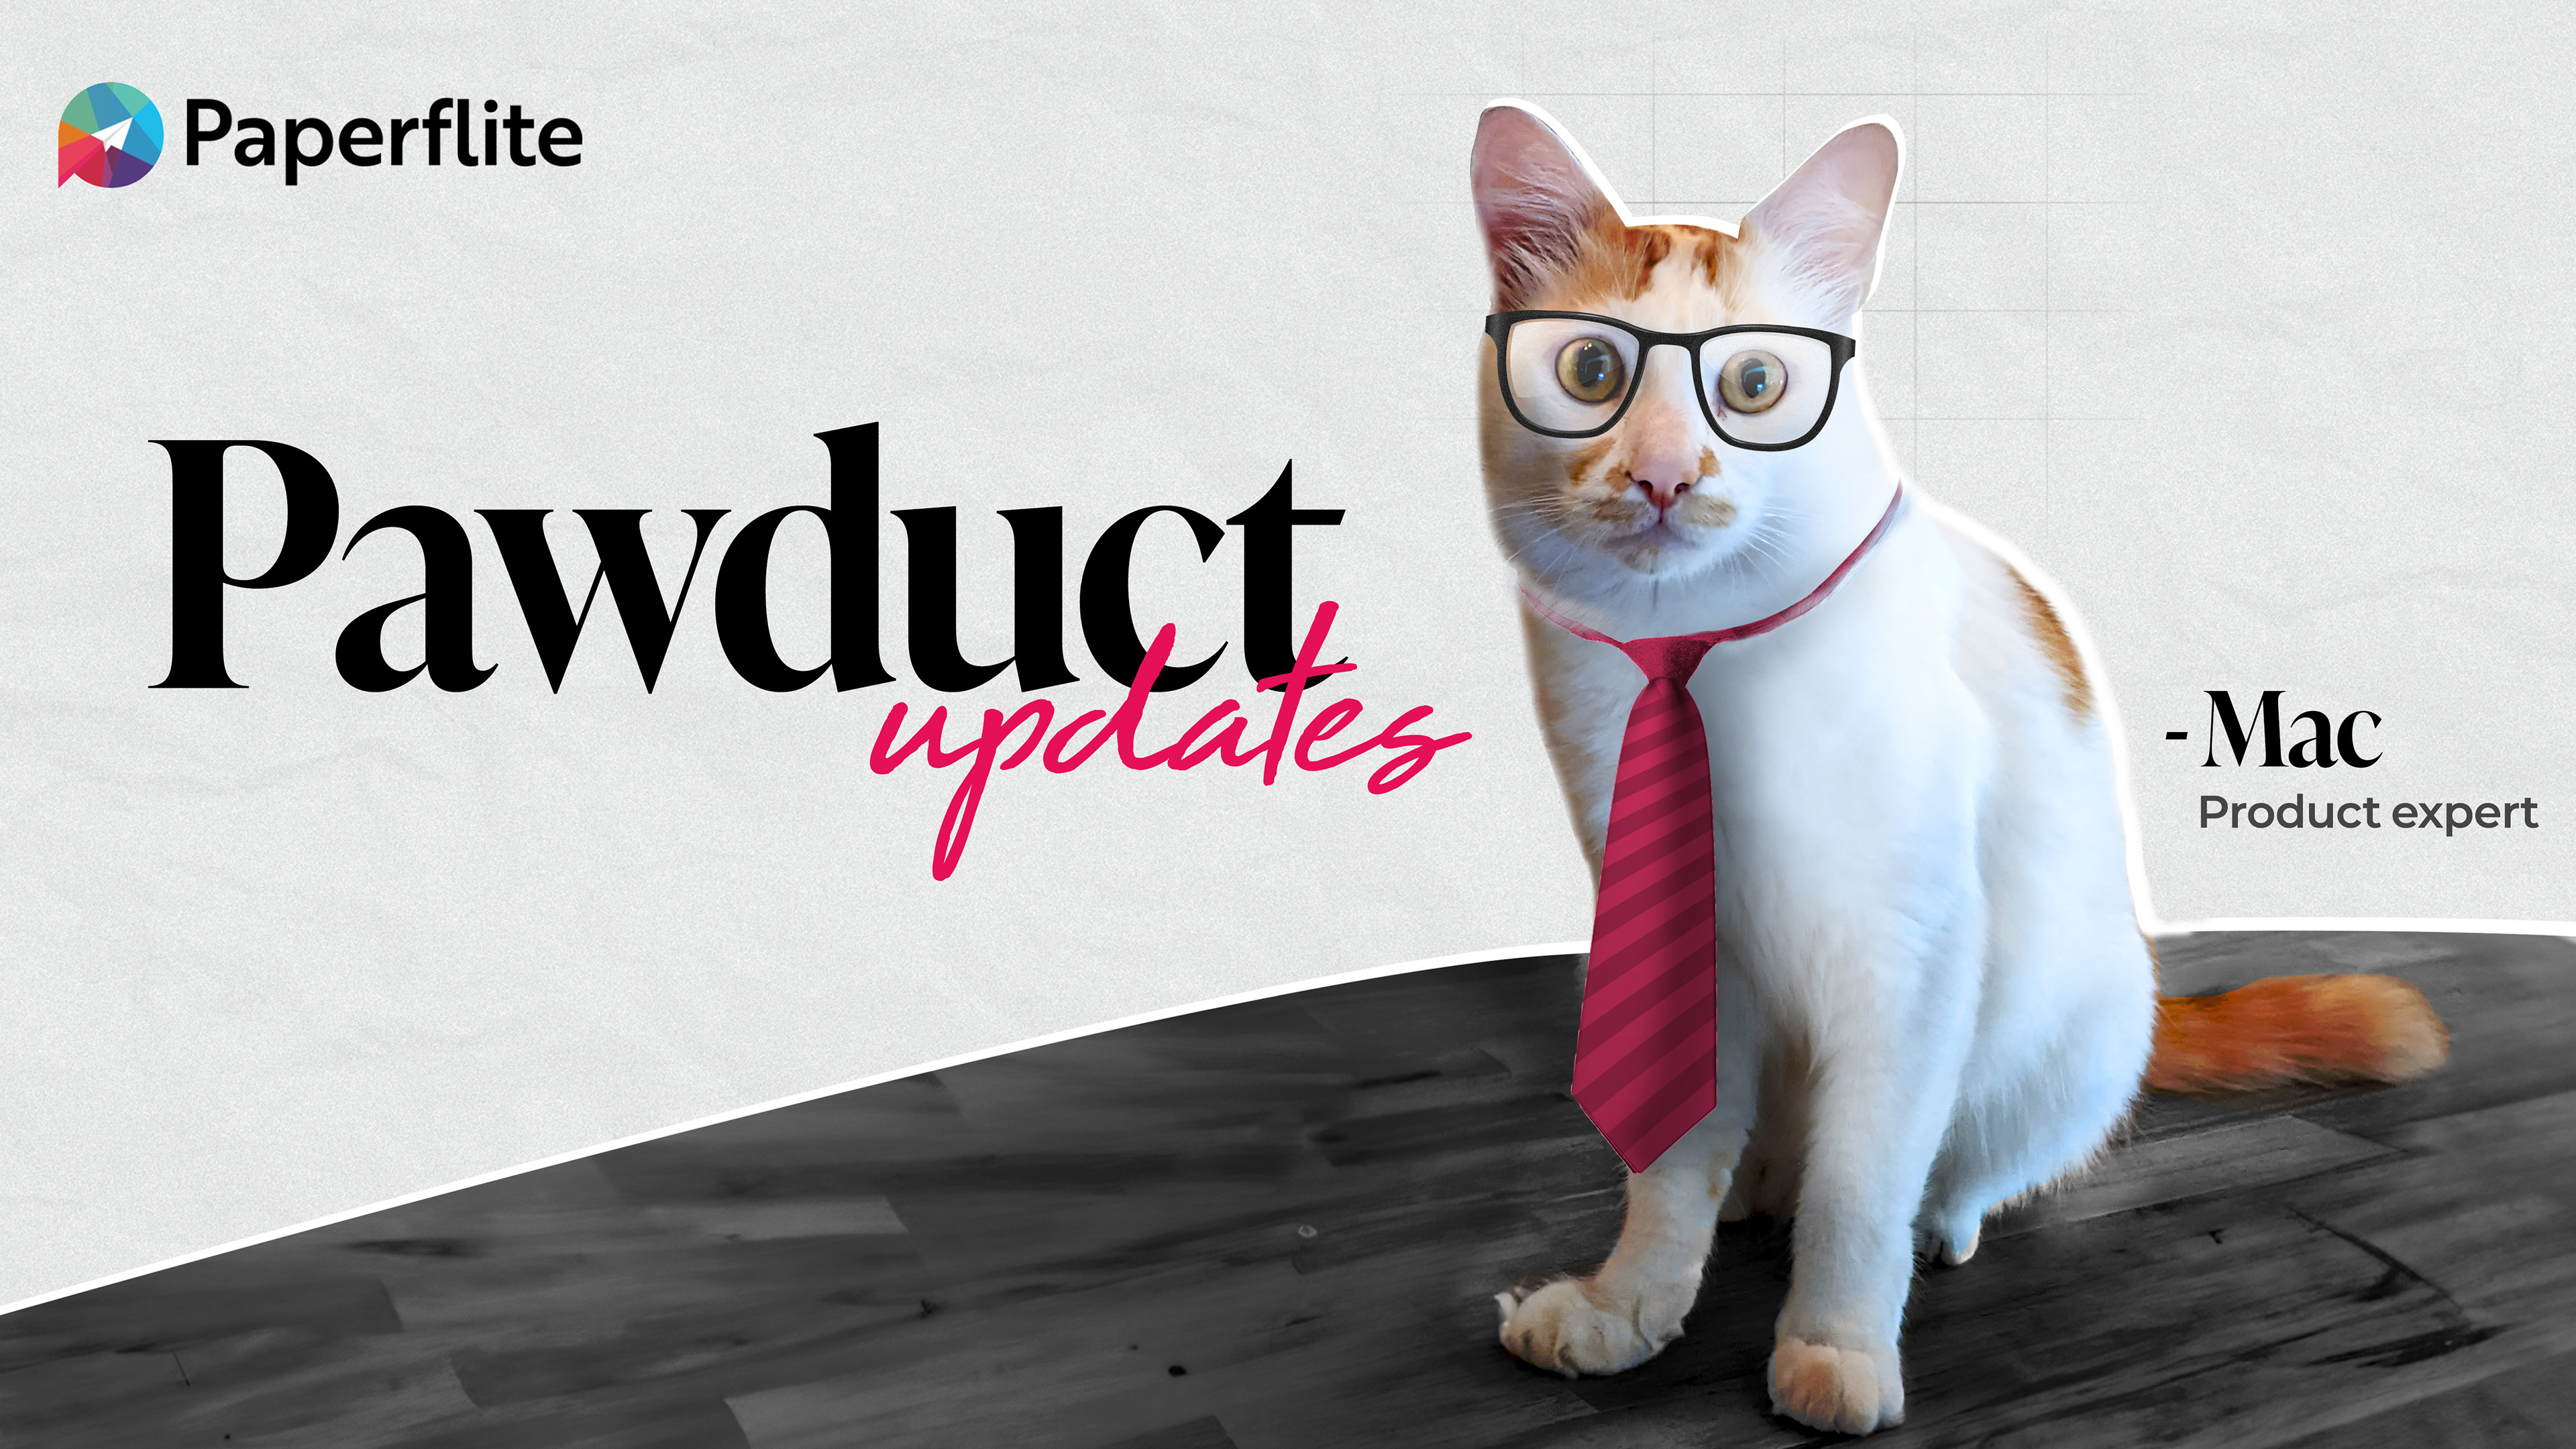 Help. Our cat hijacked the product updates!
